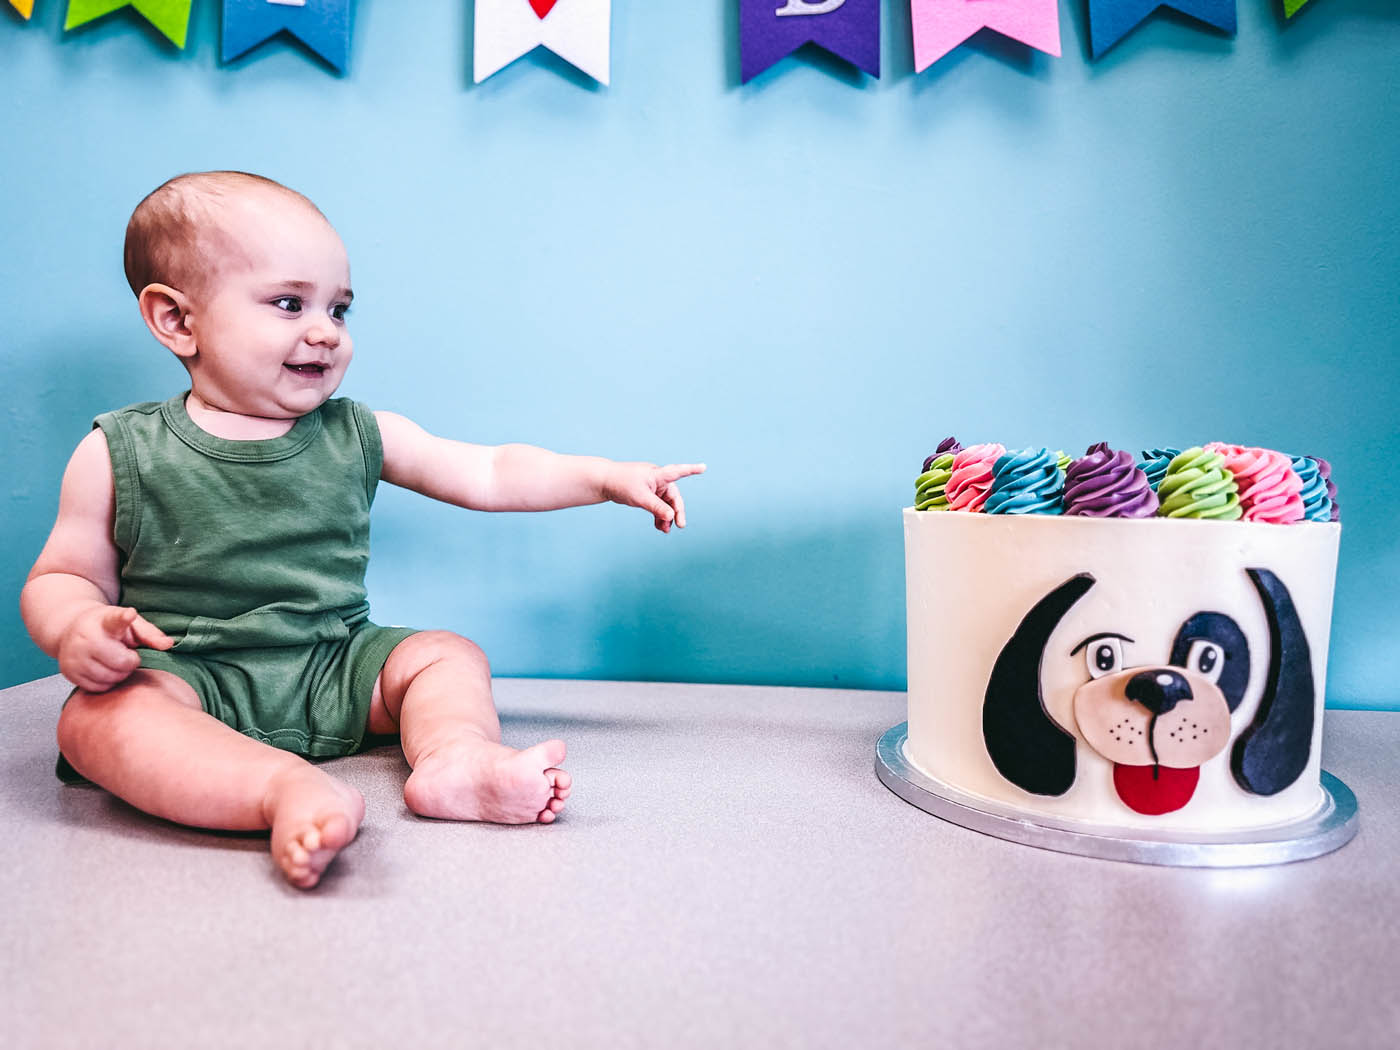 A little baby boy sitting next to a Rompy cake, book a birthday party in Wethersfield, CT!